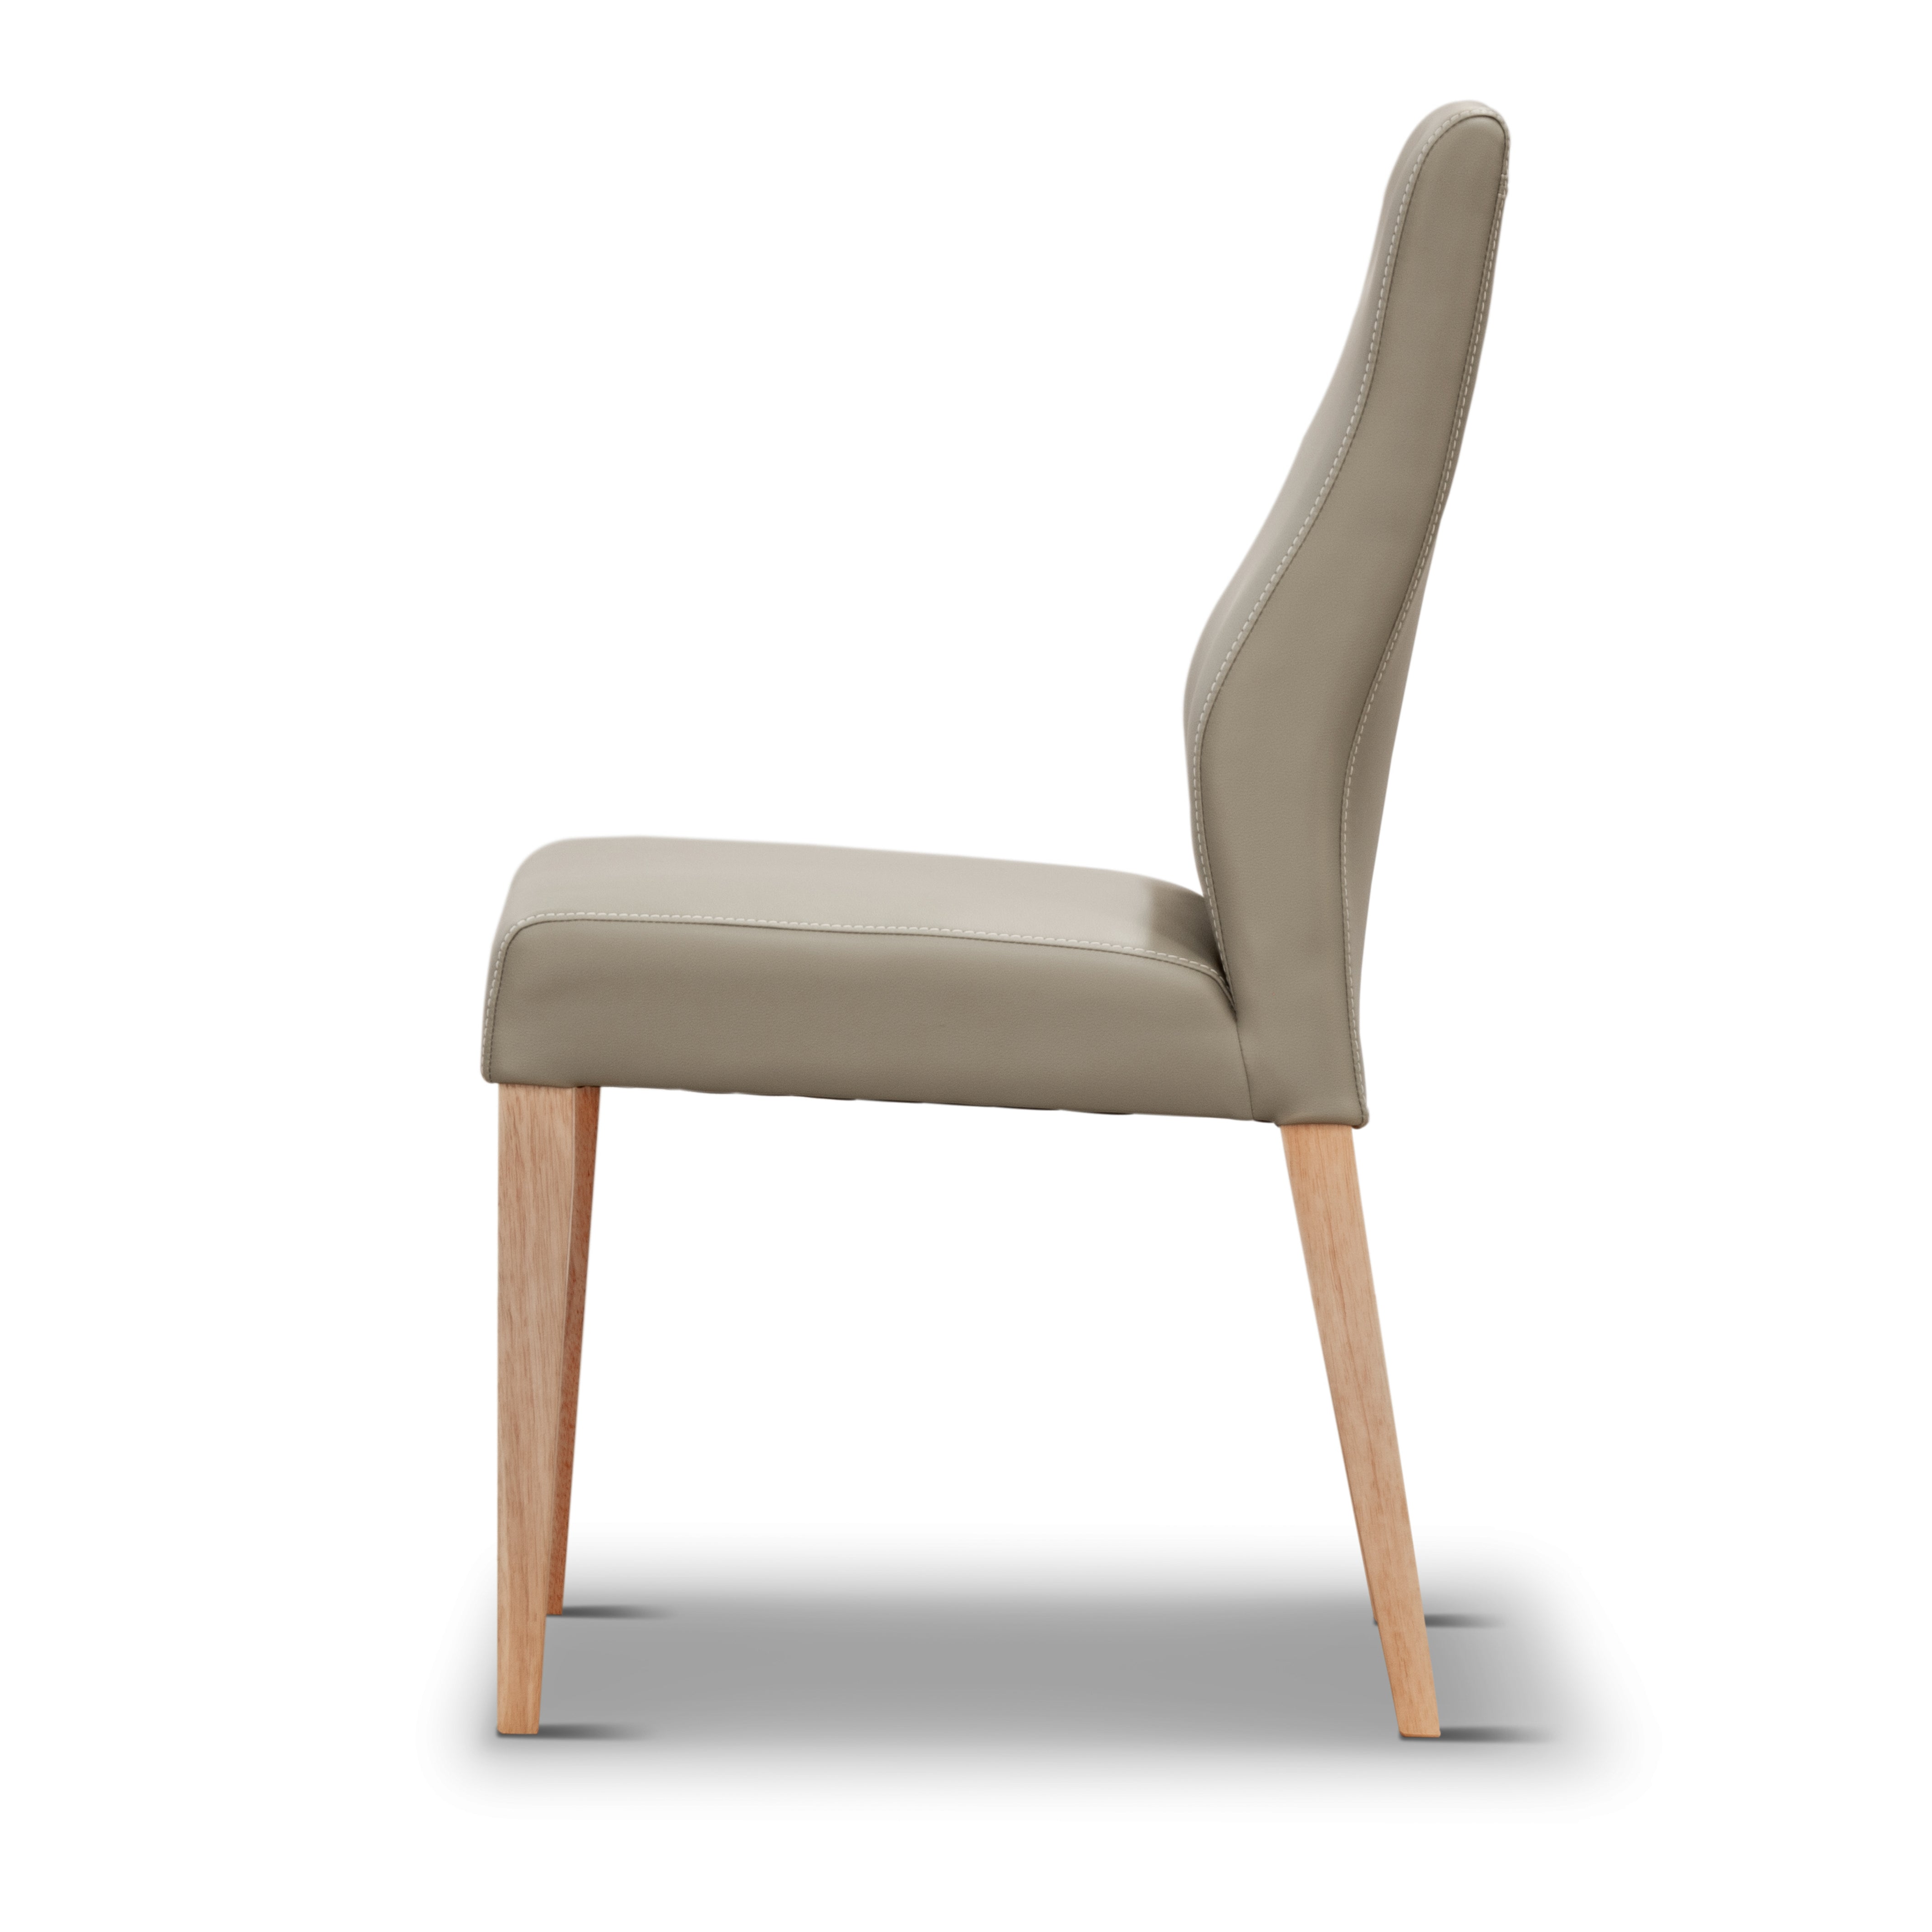 Elegant Dining Chair Set: PU Leather Seat, Solid Messmate Timber - Silver